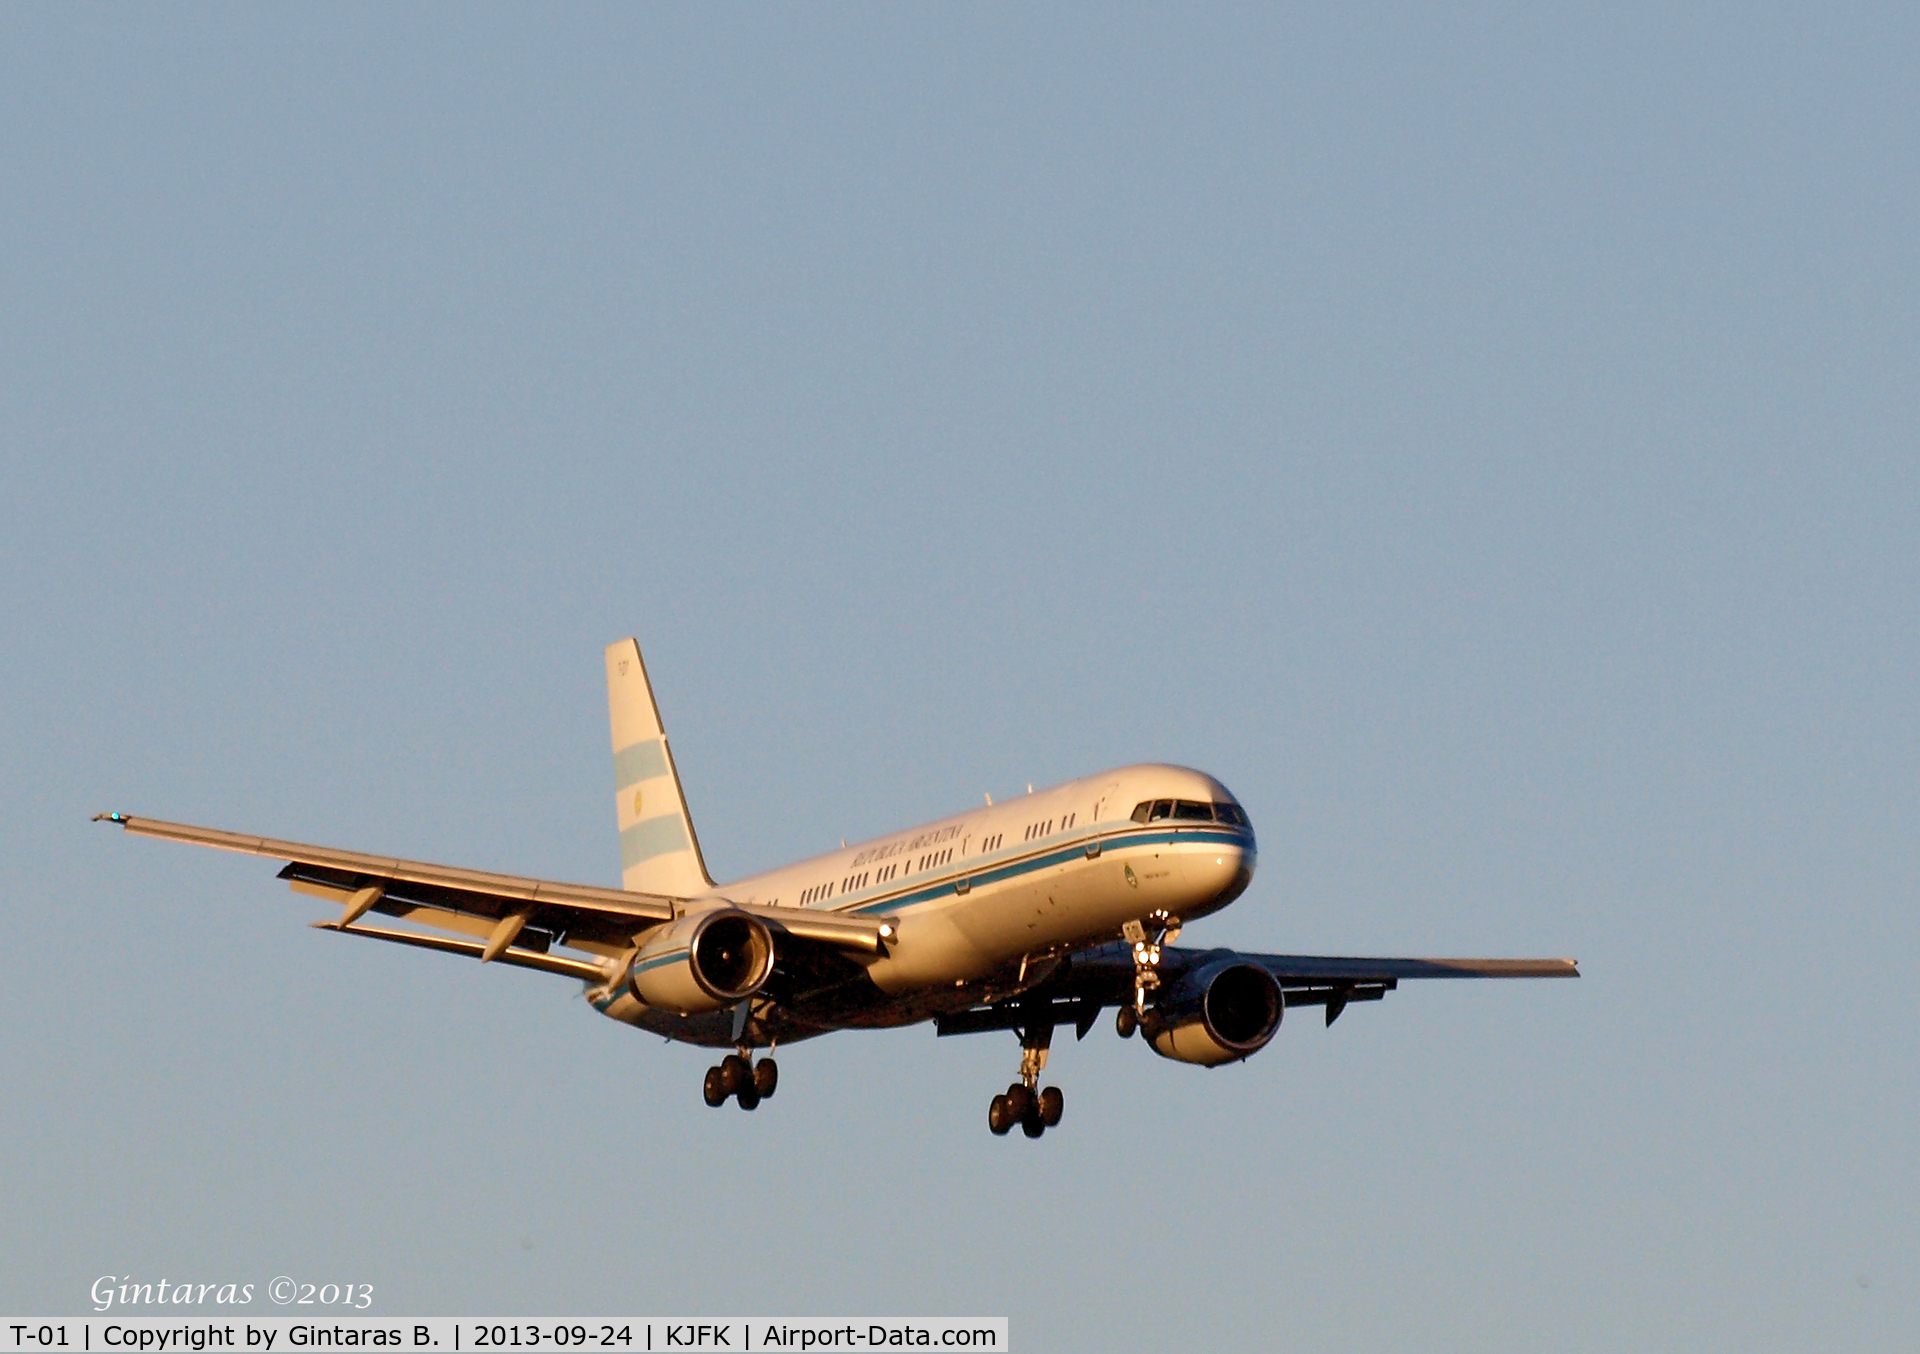 T-01, 1992 Boeing 757-23A C/N 25487/470, Government Of Argentina Aircraft going to a landing on 22L @ JFK